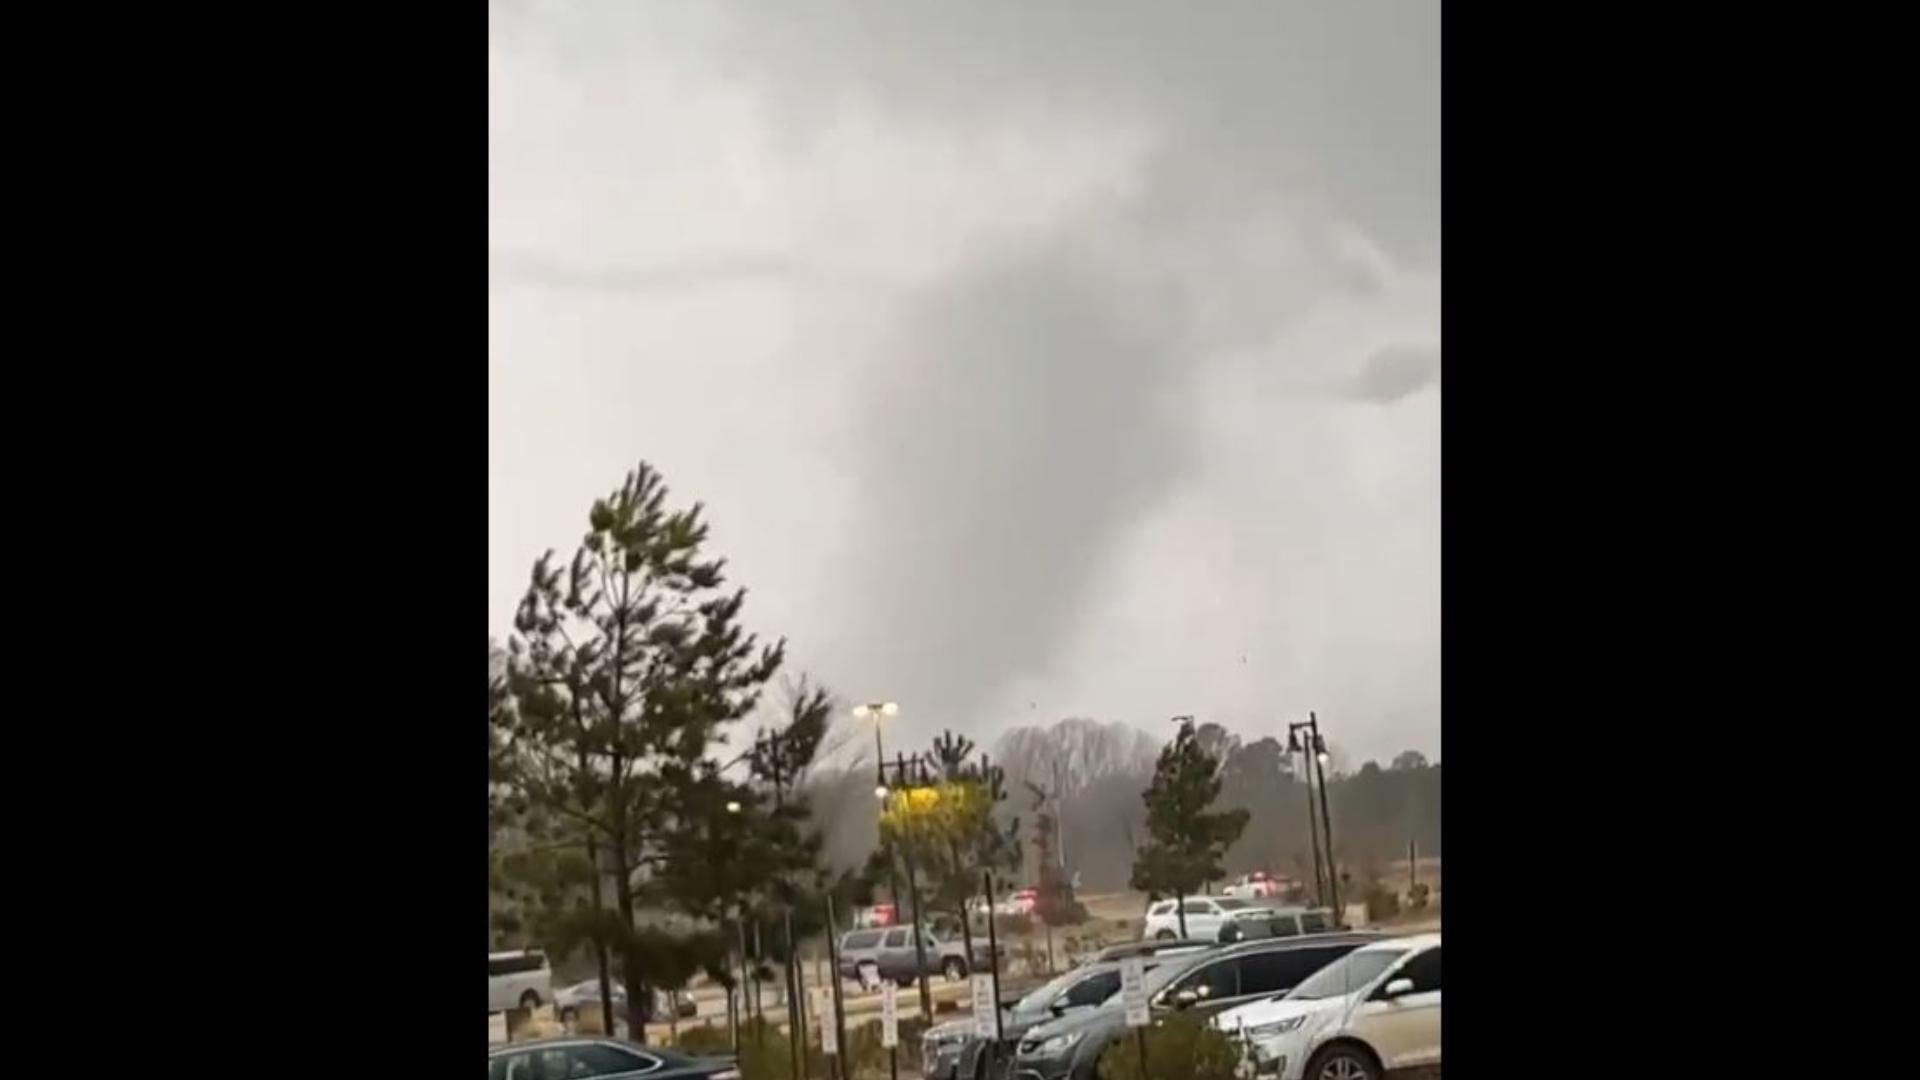 A storm system swept across Alabama and Georgia on Thursday, bringing with it tornadoes from Selma to south metro Atlanta.